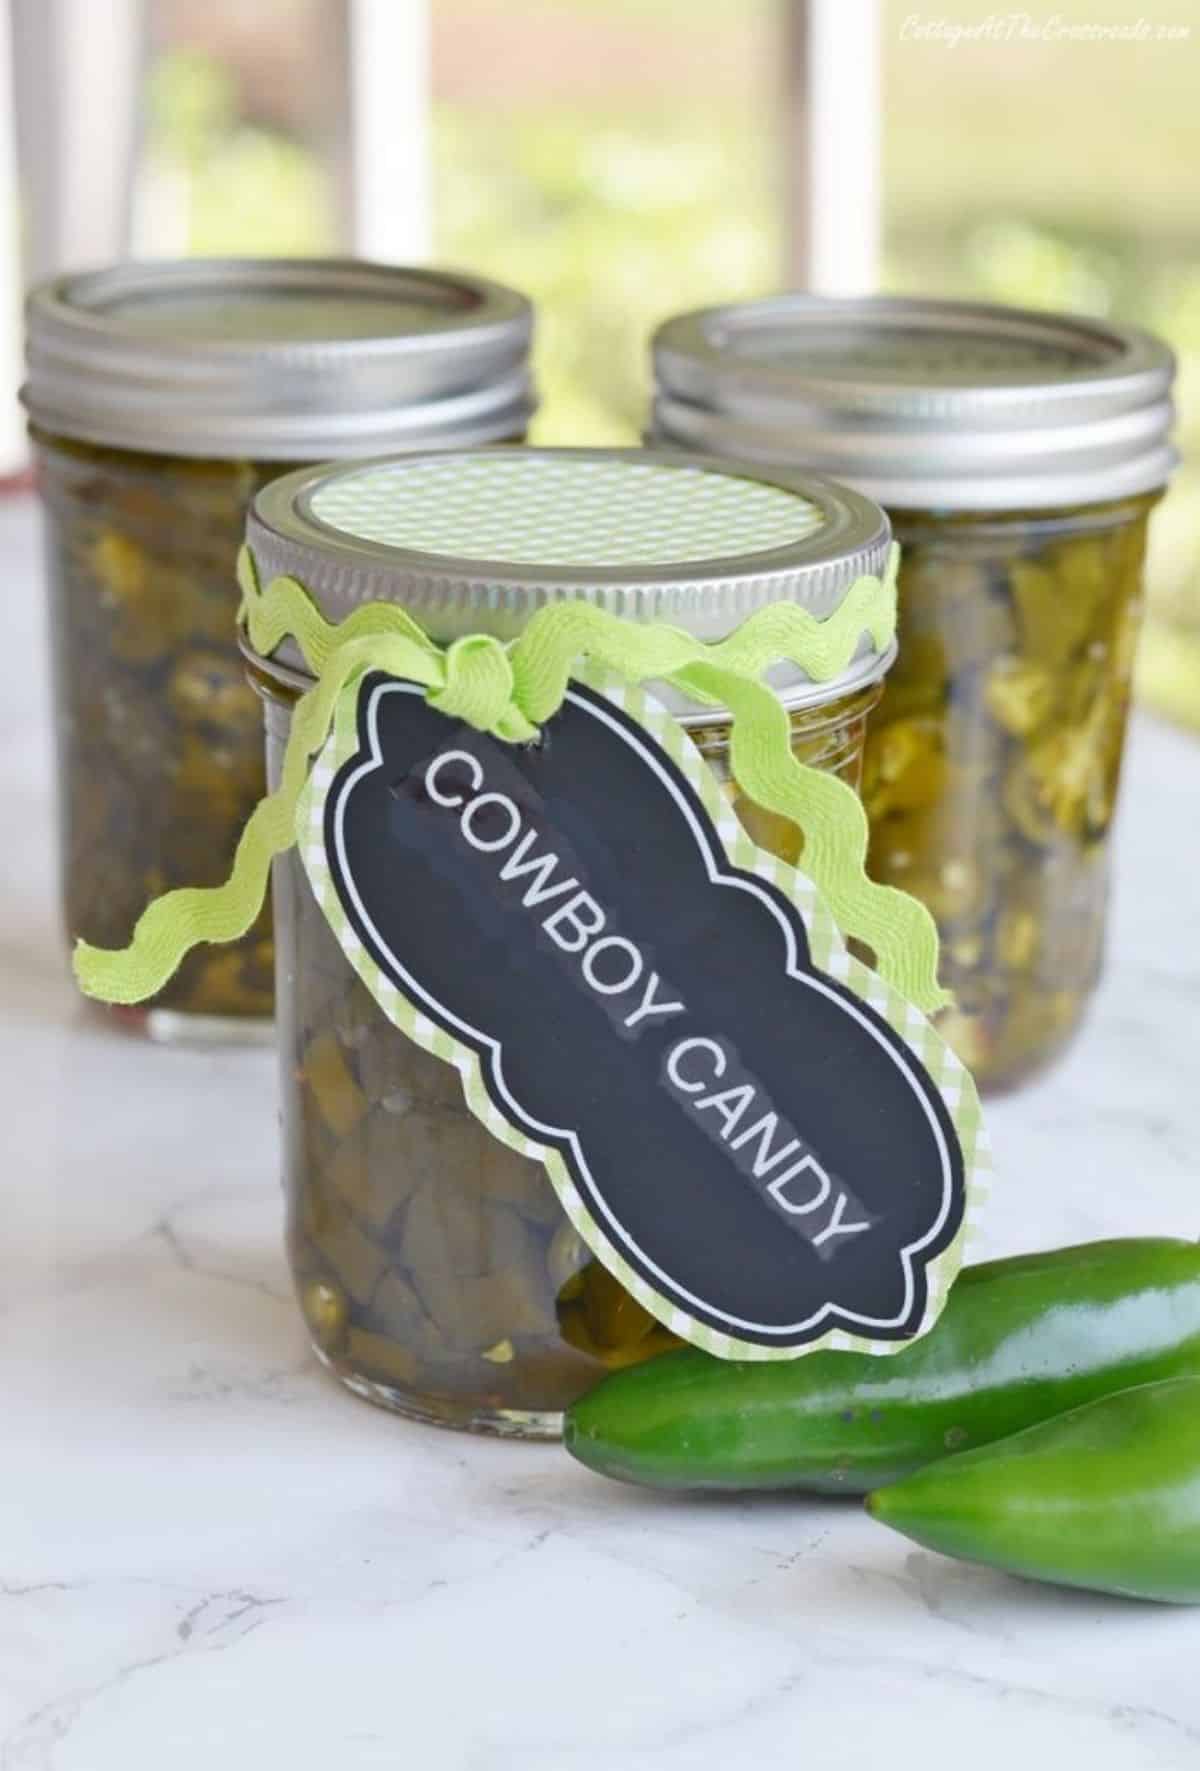 Andied jalapenos in three glass jars.